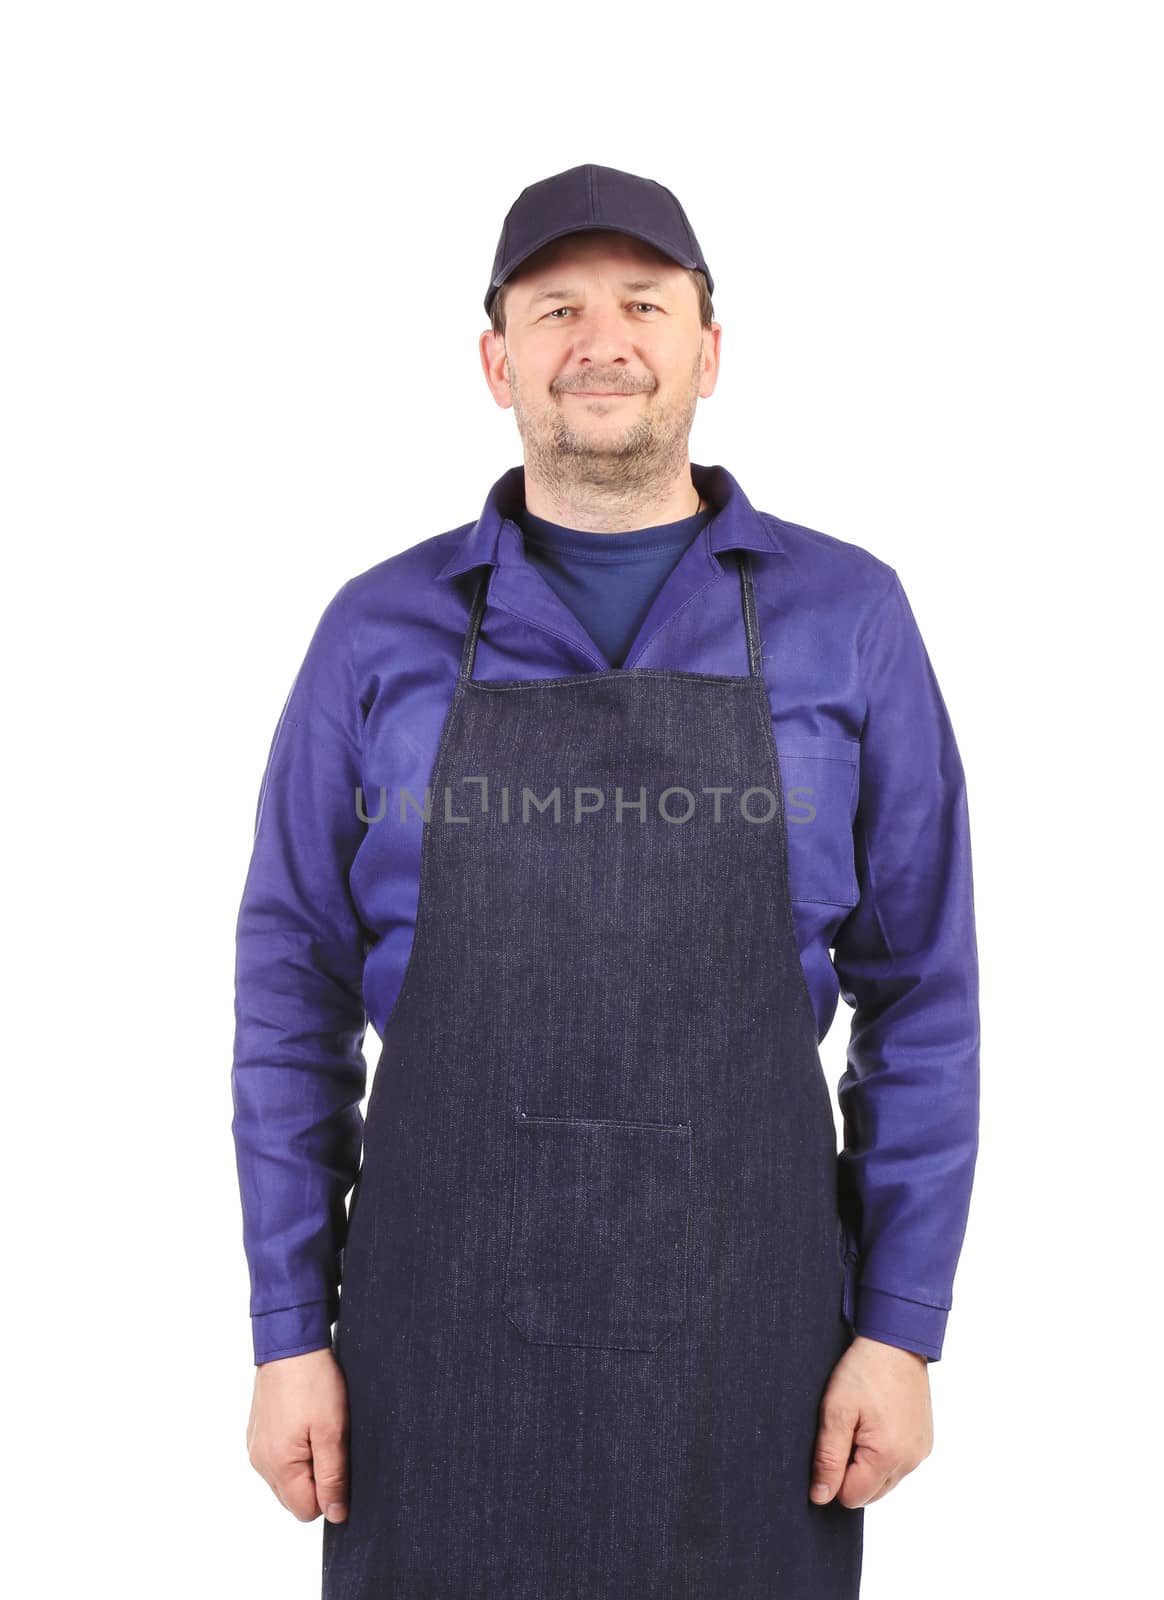 Smiling man dressed in apron. by indigolotos